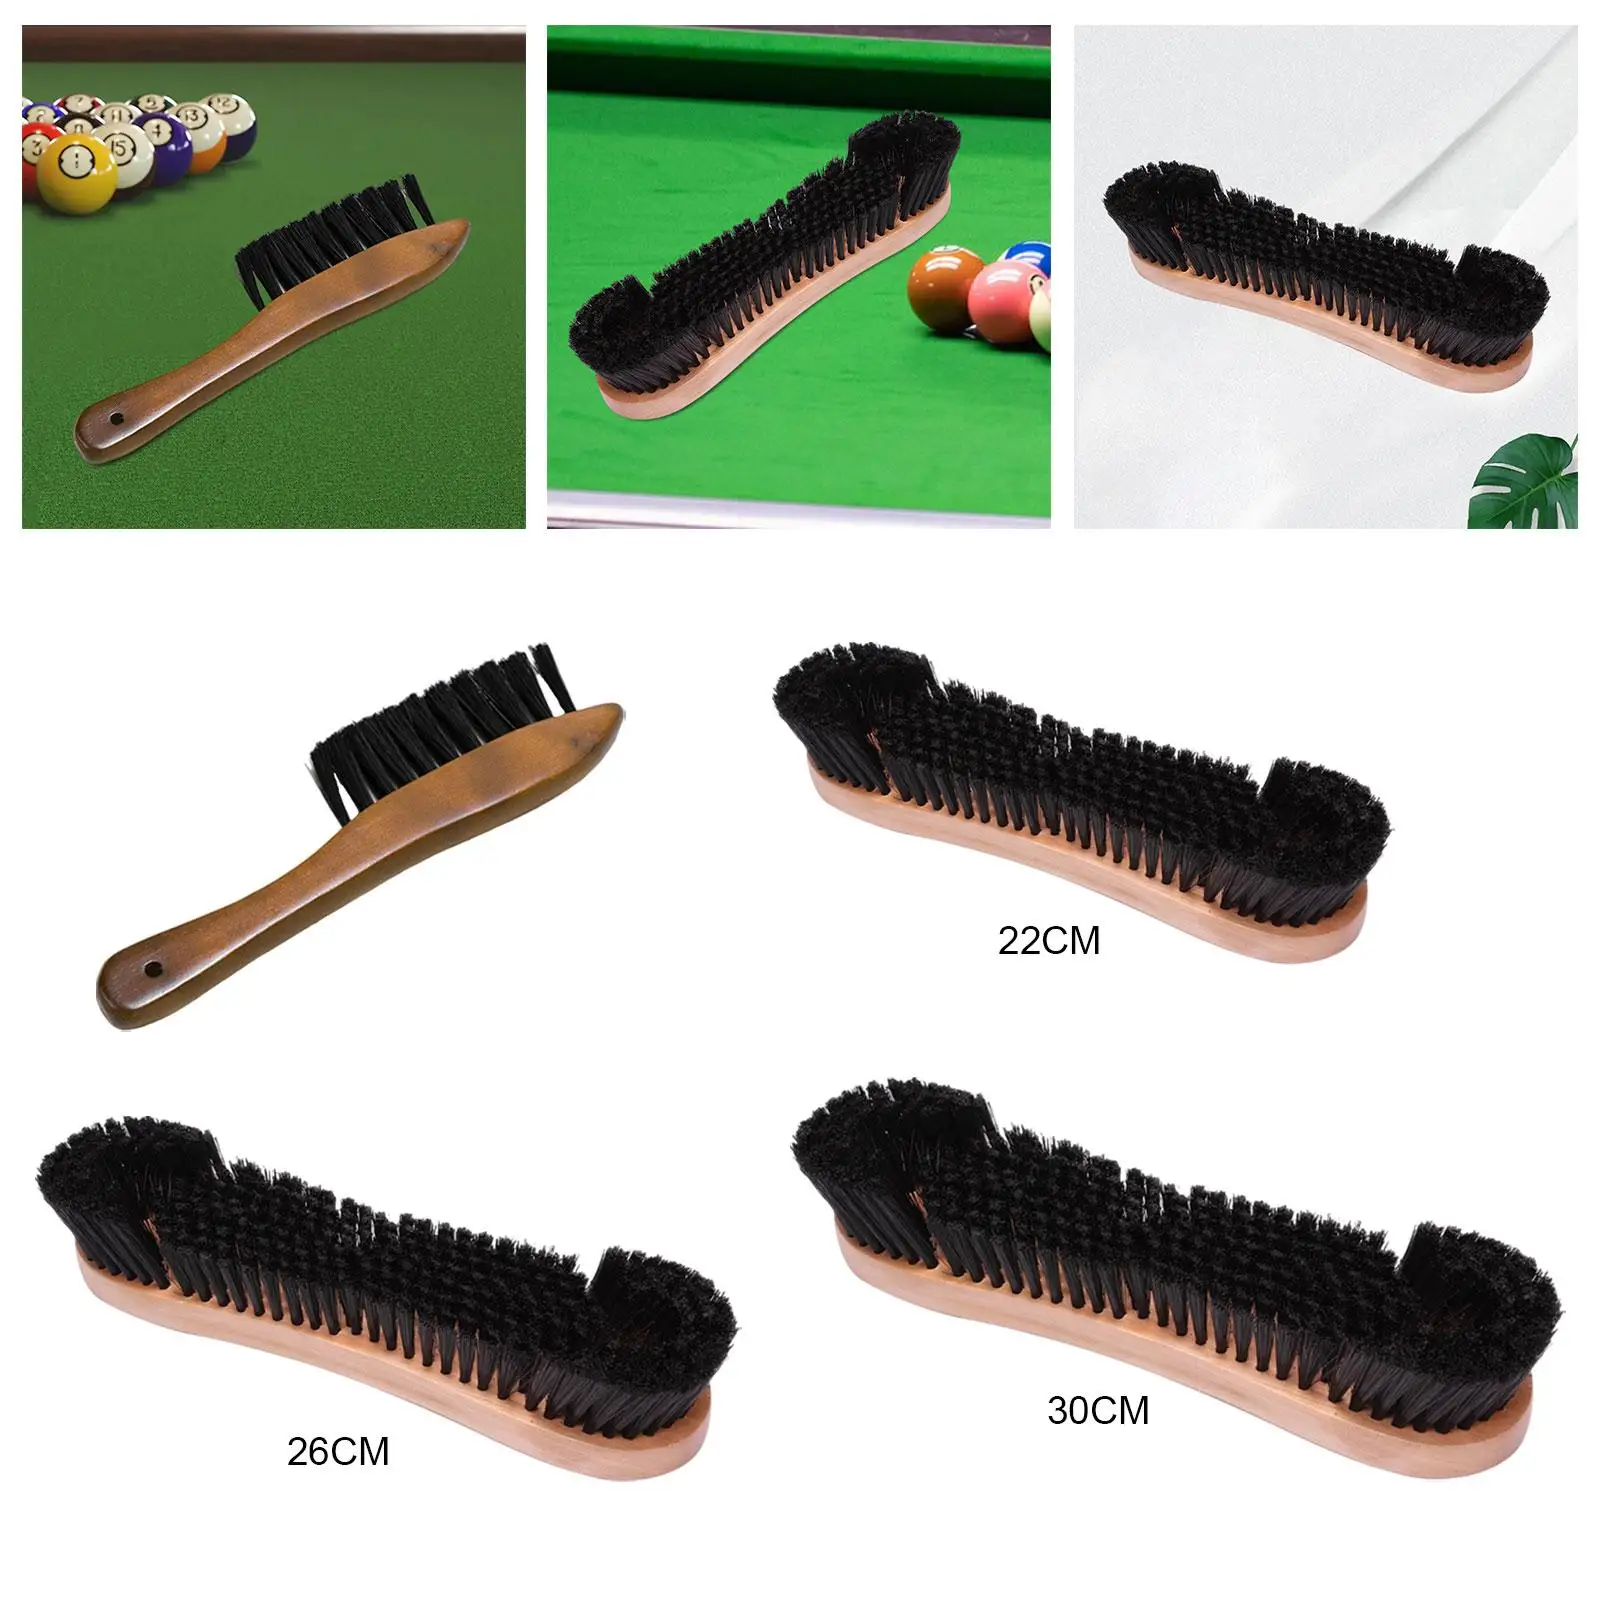 Pool Table Brush Cleaner, Snooker Billiards Pool Table Rail Brush with Wooden Handle, Billiard Table Cleaning Tool Supplies